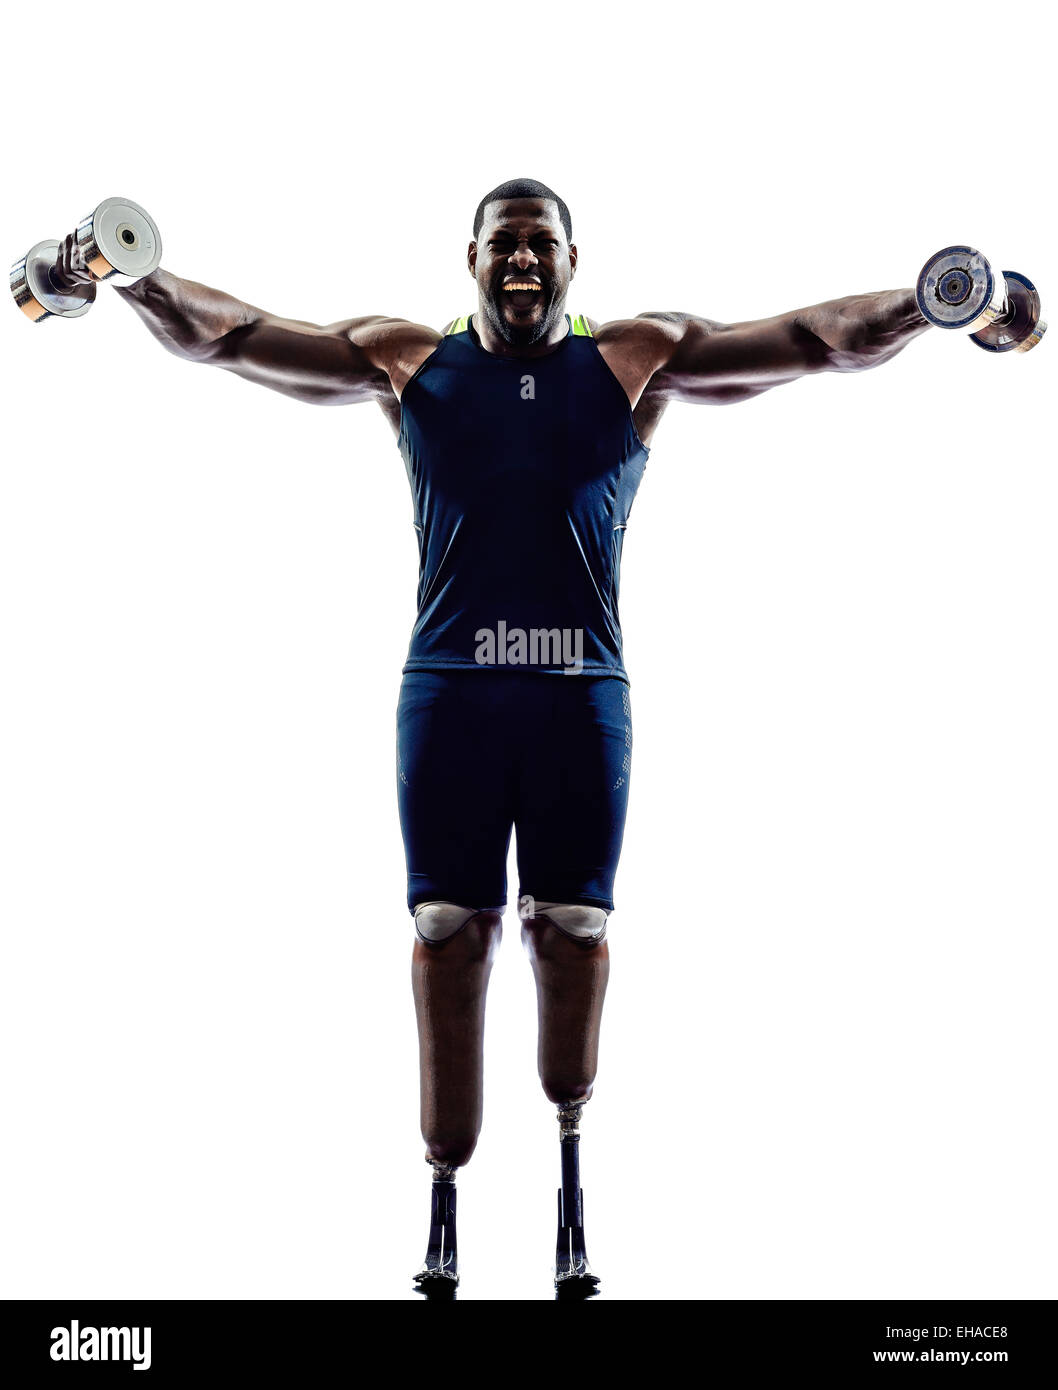 one muscular handicapped man body builders building weights with legs prosthesis in silhouette on white background Stock Photo